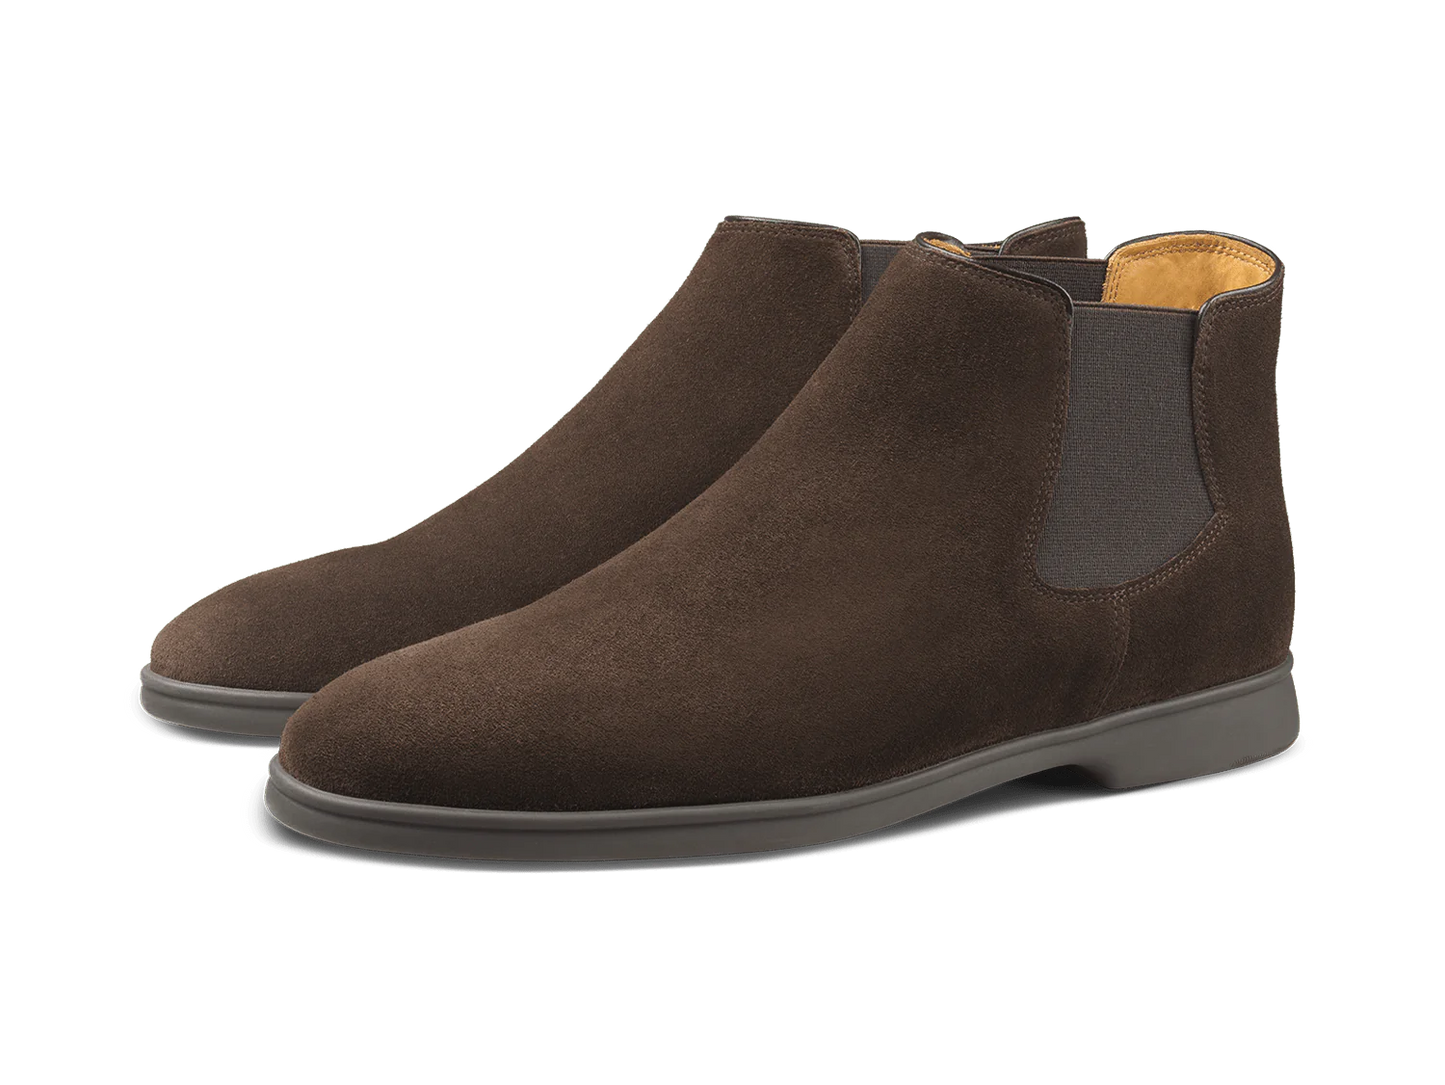 BLG Rover Boots Dark Brown Suede Taupe Sole